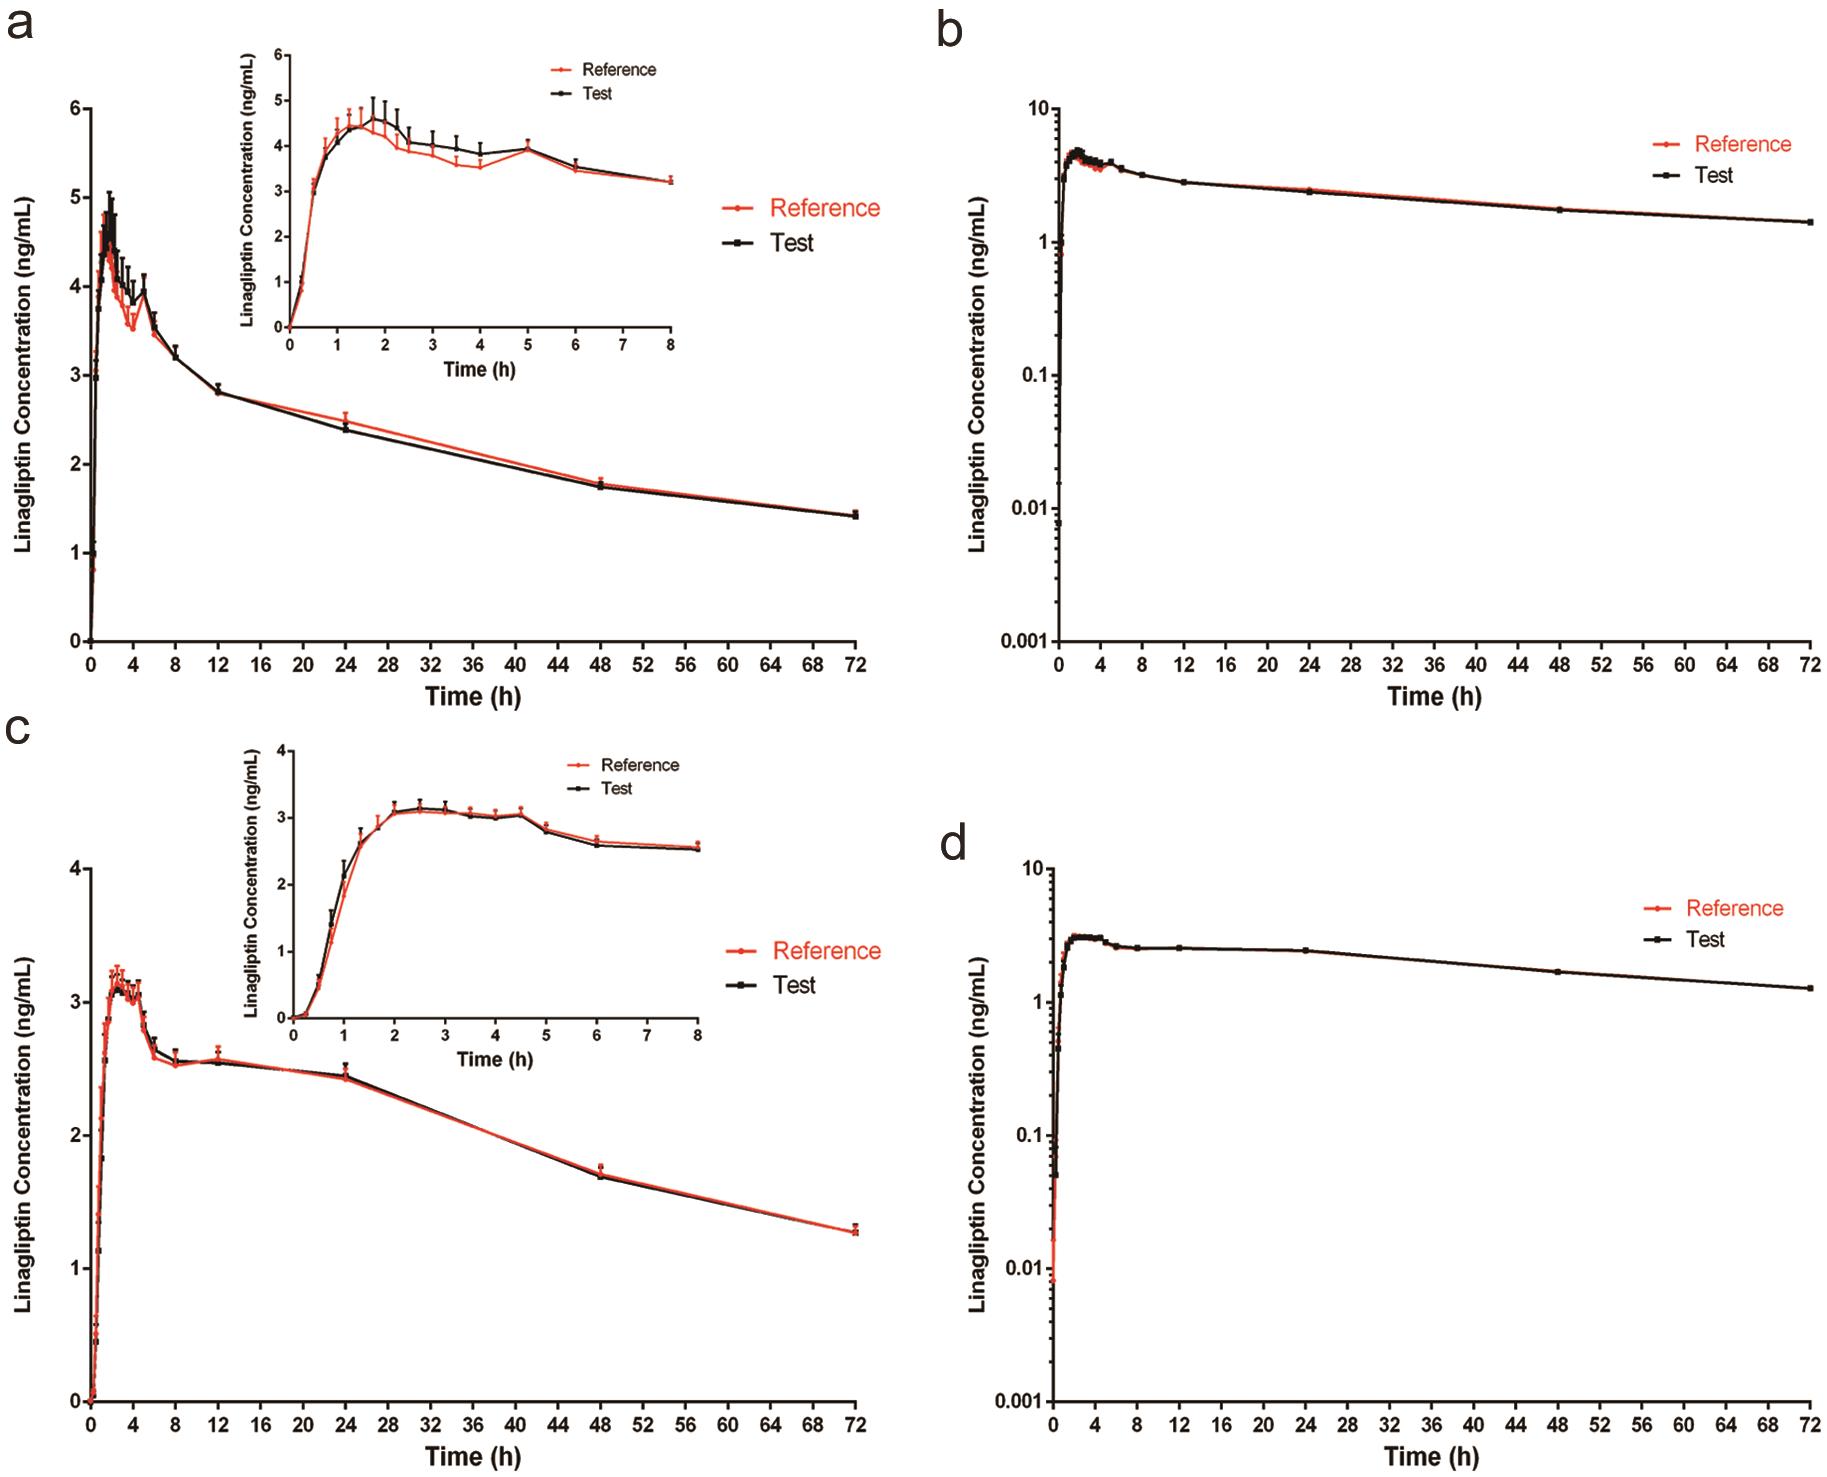 Mean (±SEM) plasma concentration-time curves (a) and semilogarithmic curves (b) of the test and the reference products of Linagliptin in healthy subjects under fasting conditions.